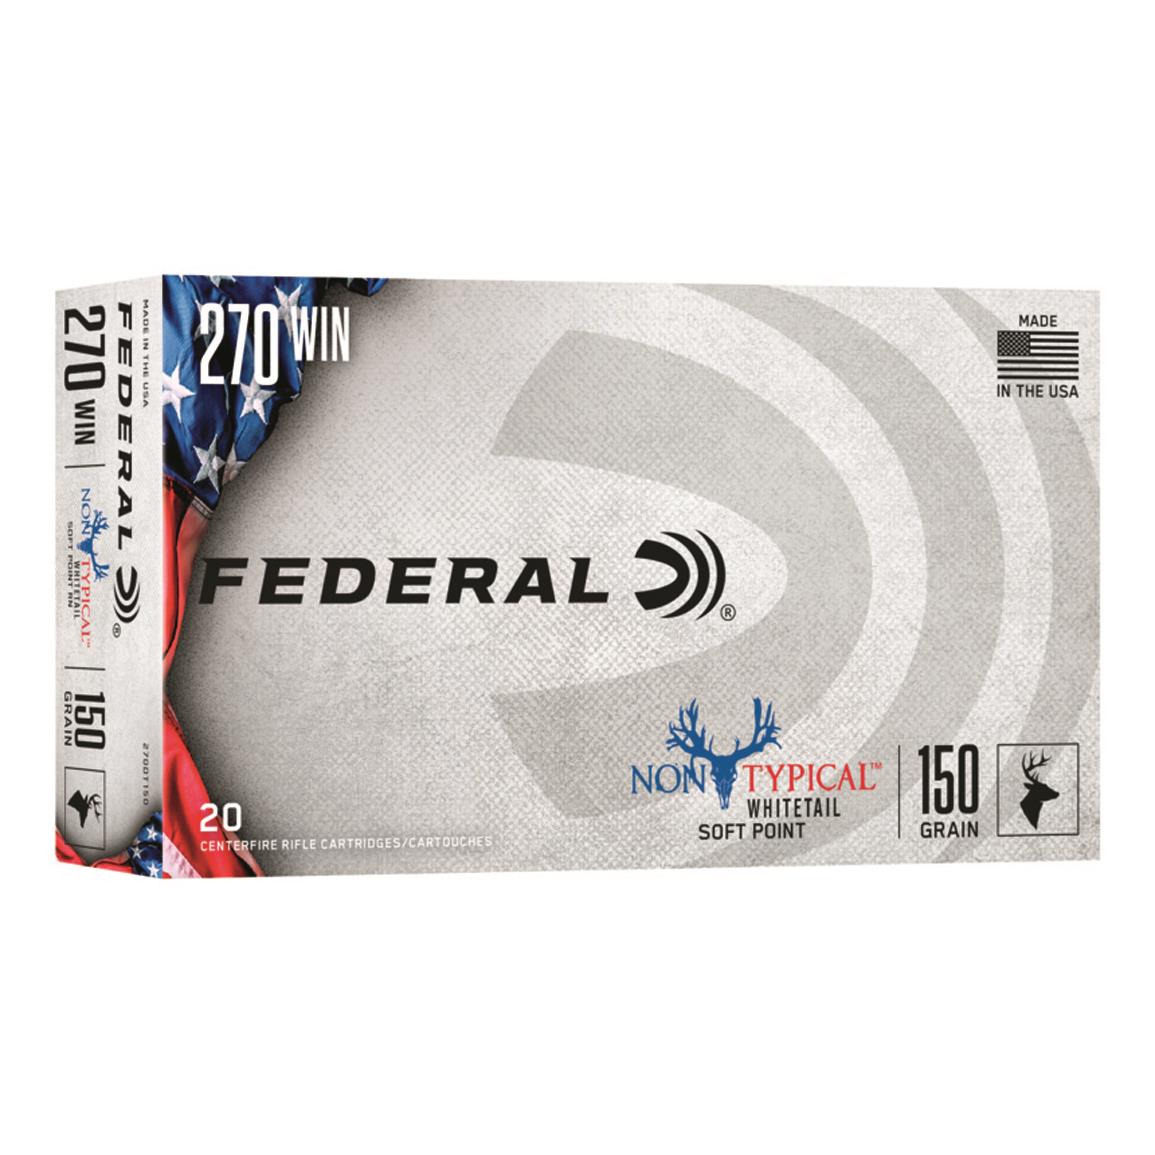 Federal Non-Typical, .270 Winchester, SP, 150 Grain, 20 Rounds